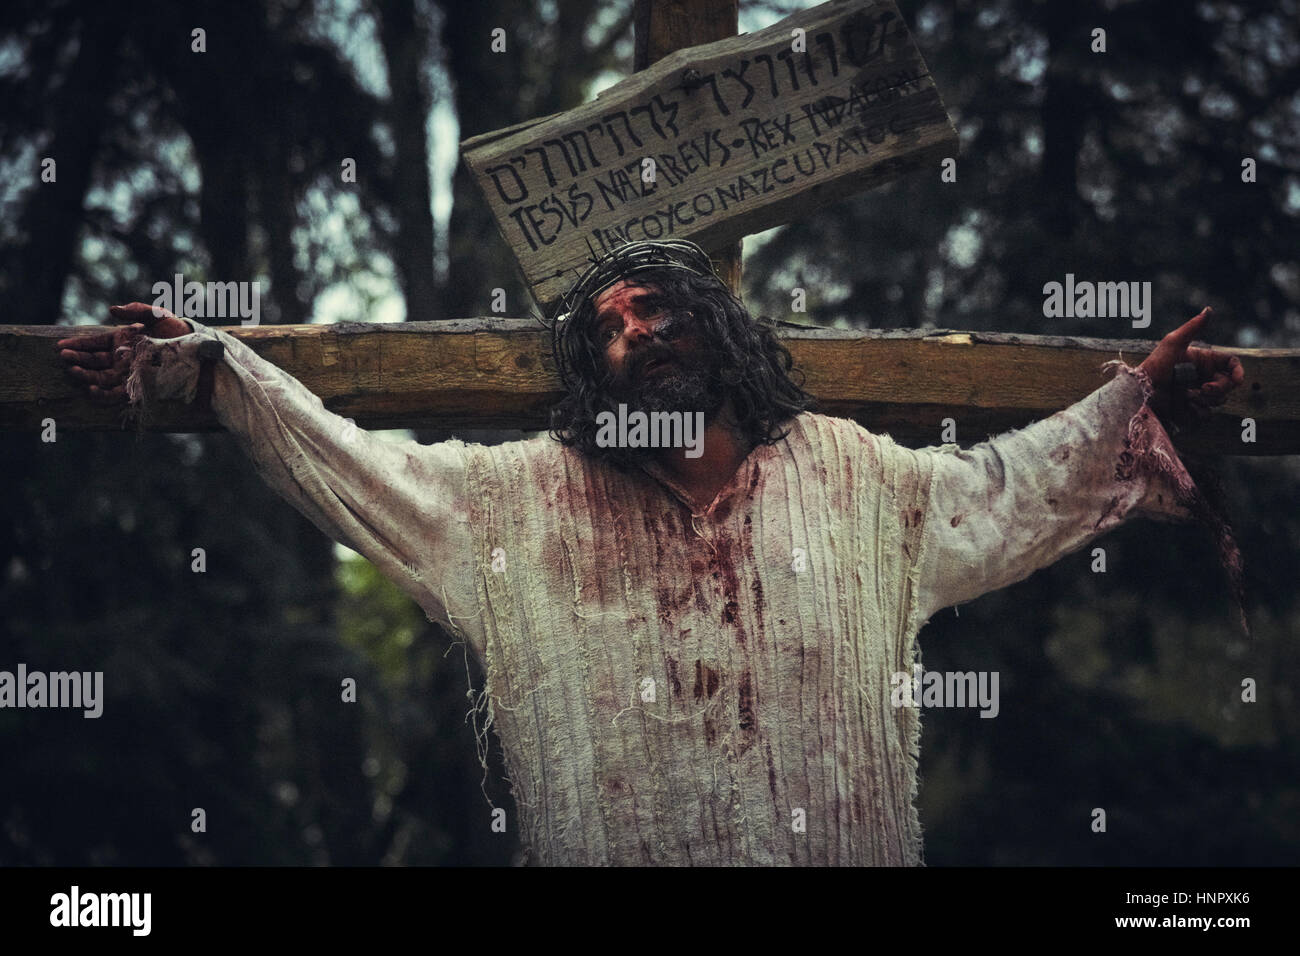 Actor plays Jesus Christ crucified during the street reenactment of the Stations of the Cross on Good Friday, April 15, 2014, Bucharest, Romania Stock Photo